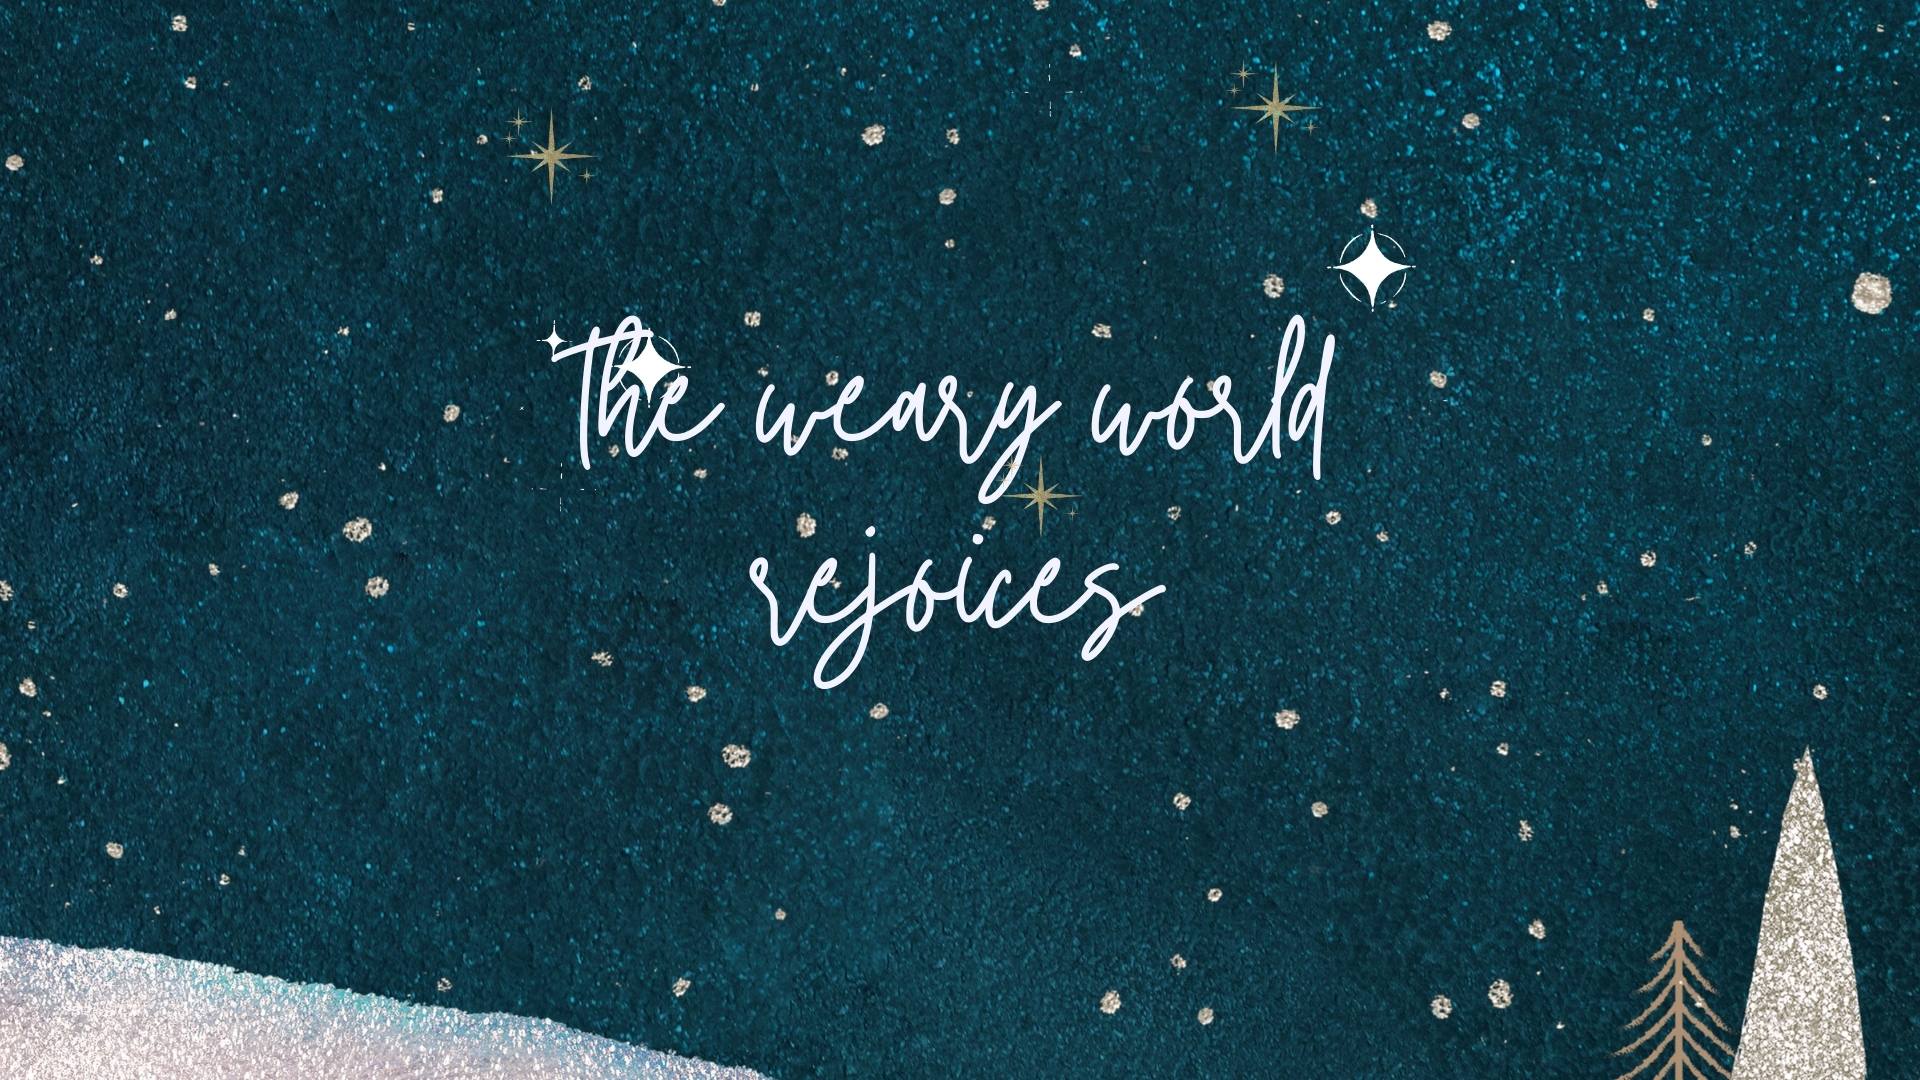 Starry Background with the words " A weary world rejoices on top"